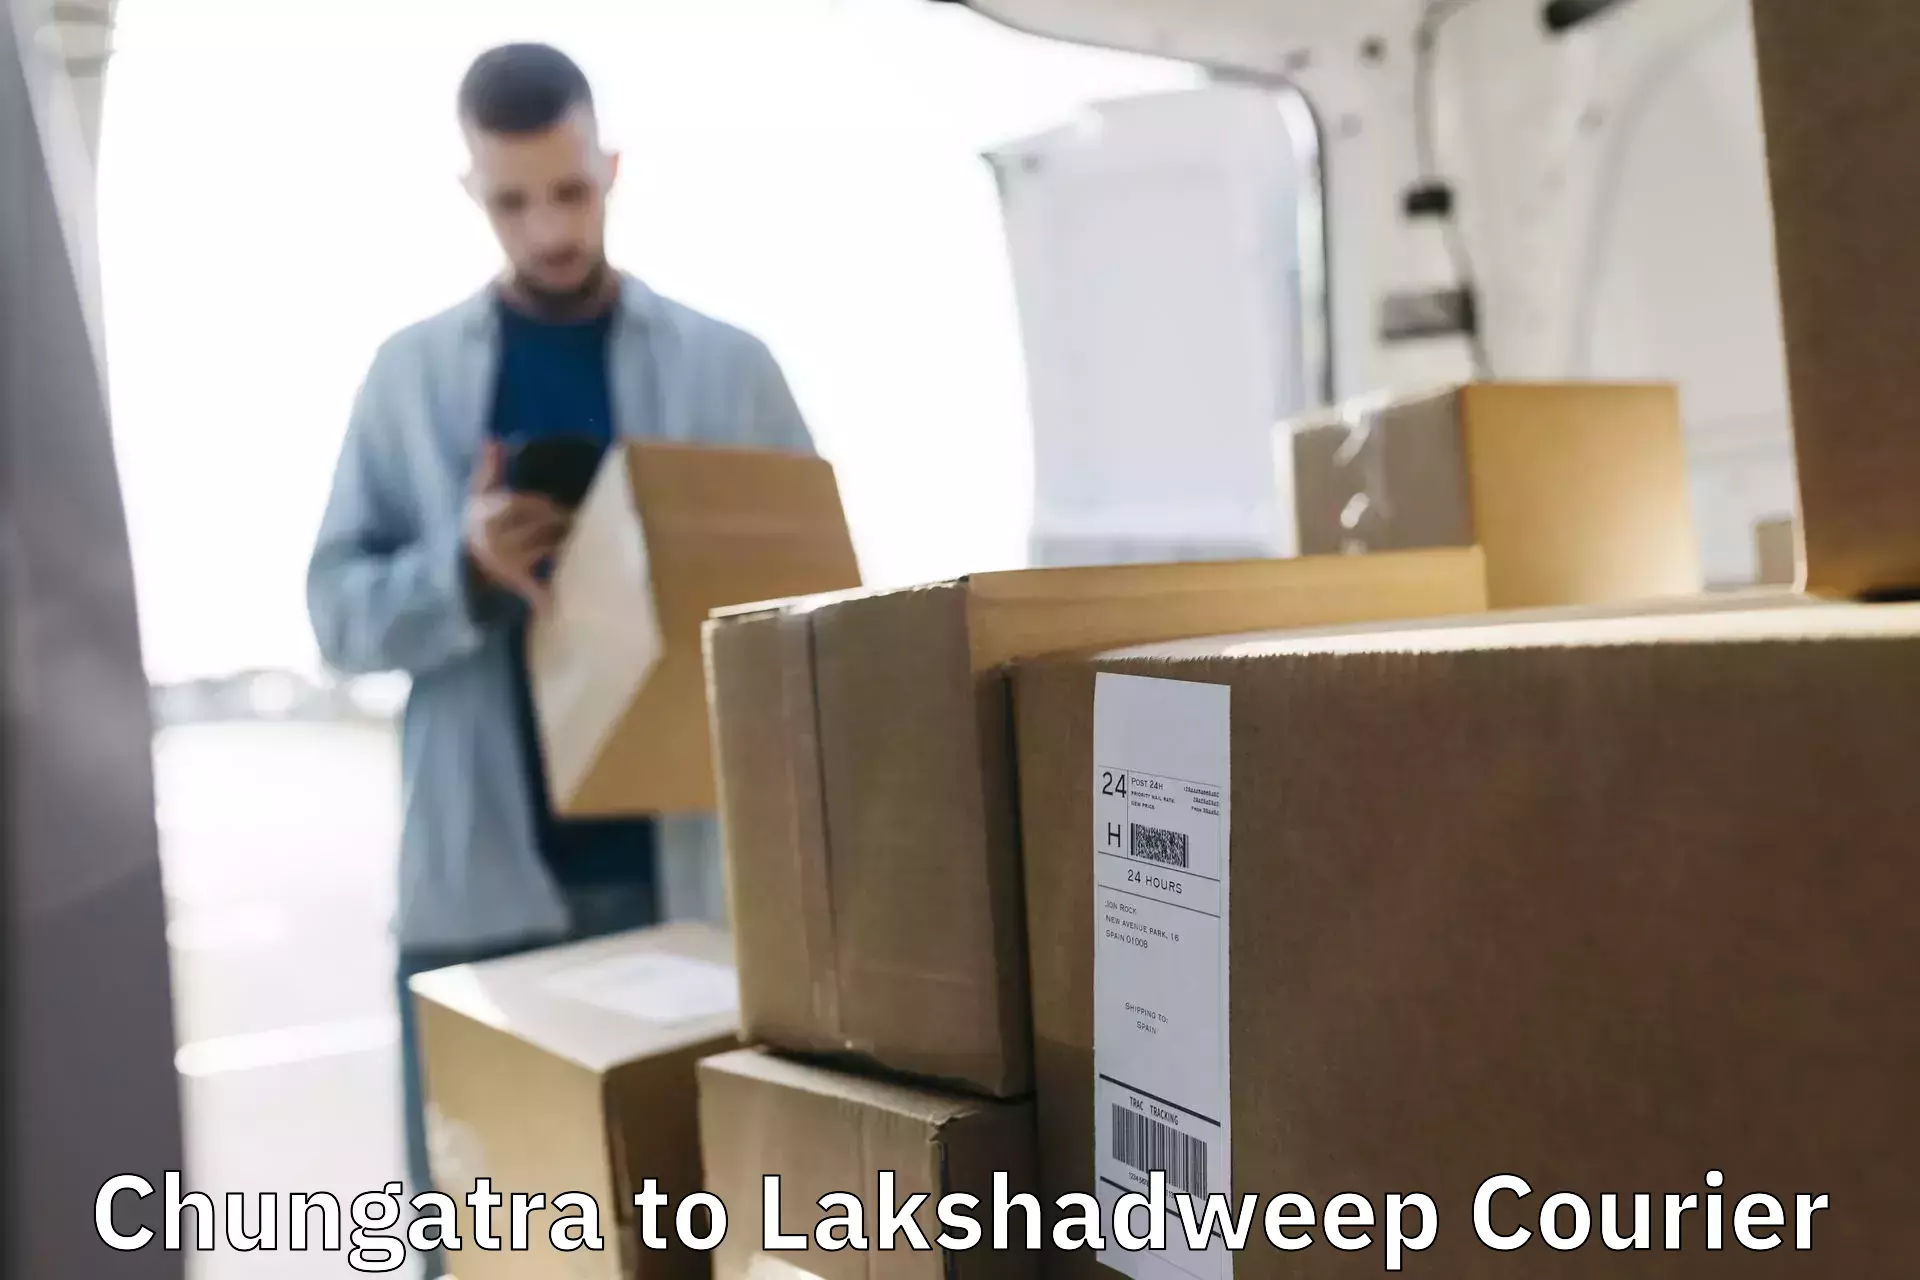 High-priority parcel service Chungatra to Lakshadweep